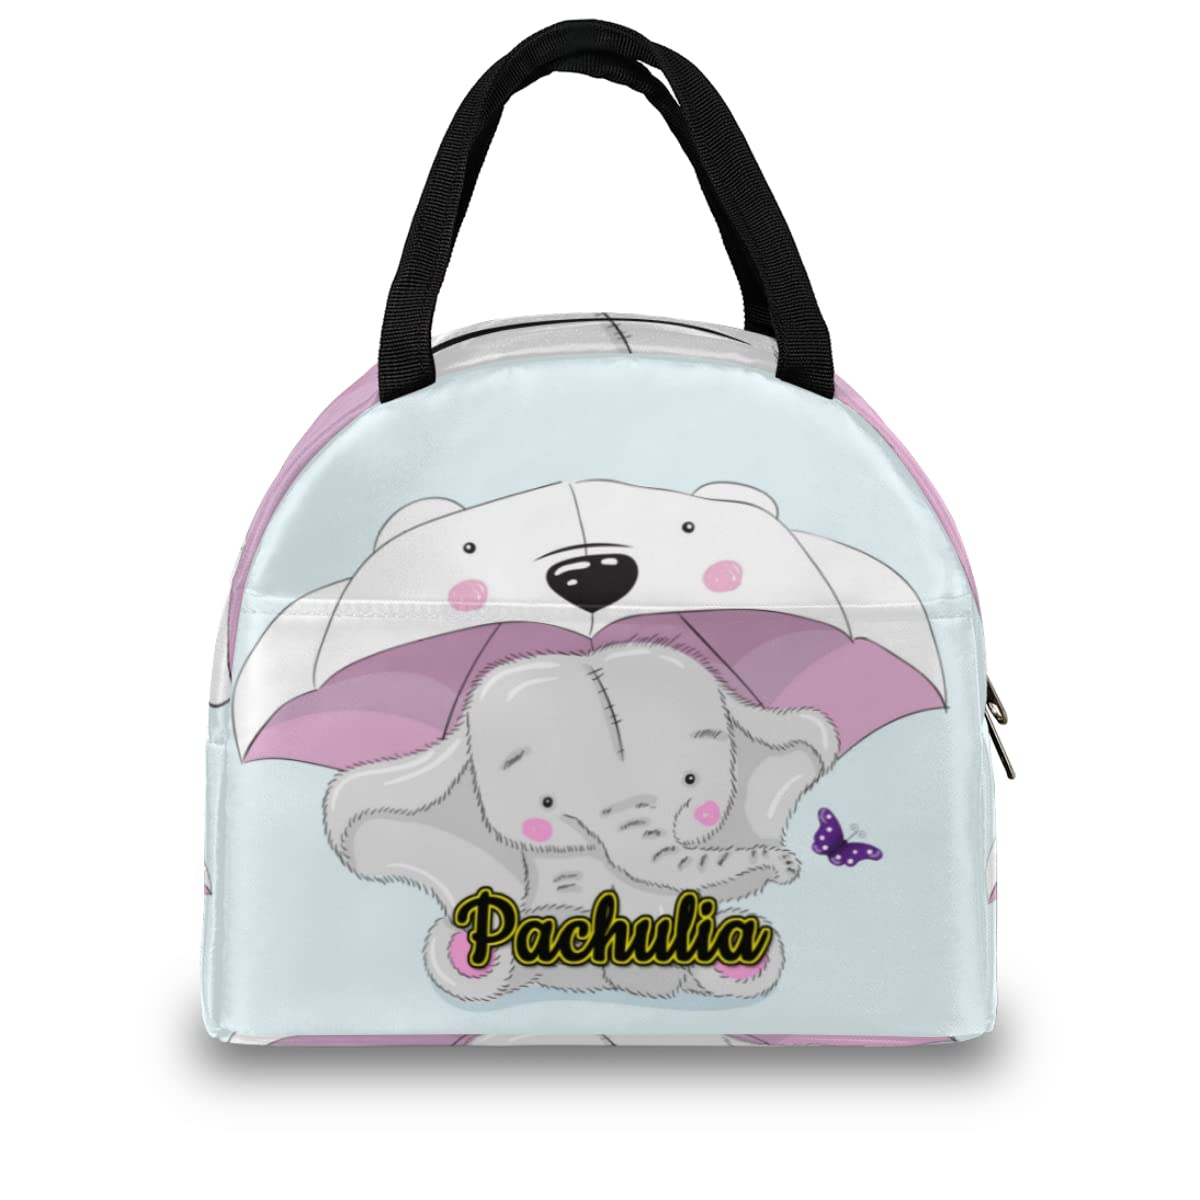 Personalized Text Lunch Bag - Customize Name School Portable Durable Hand Carrying Insulated Lunch Bag Cute Elephant Cartoon